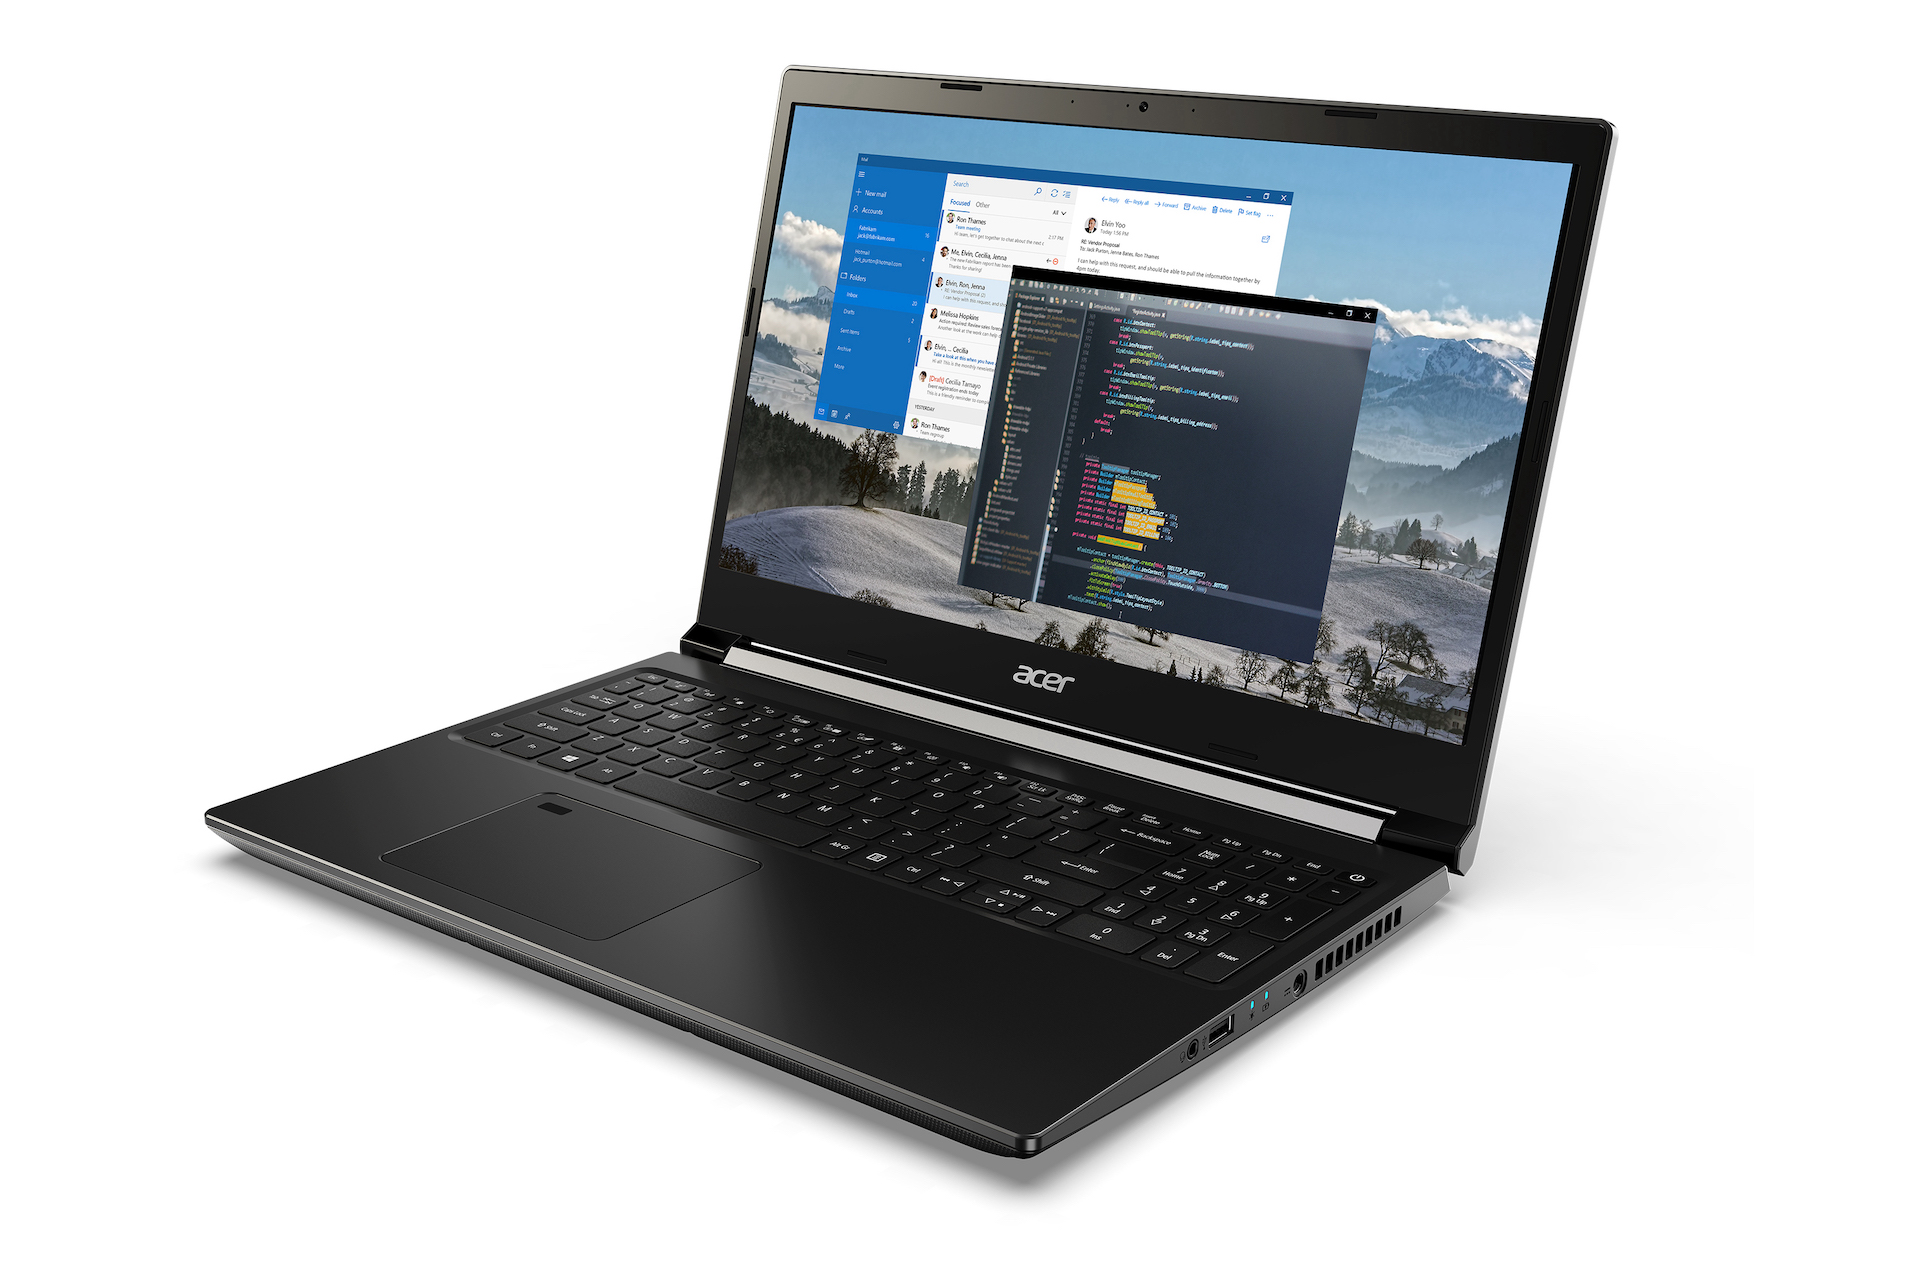 Acer’s sleek and powerful Aspire 7, available now in the UAE